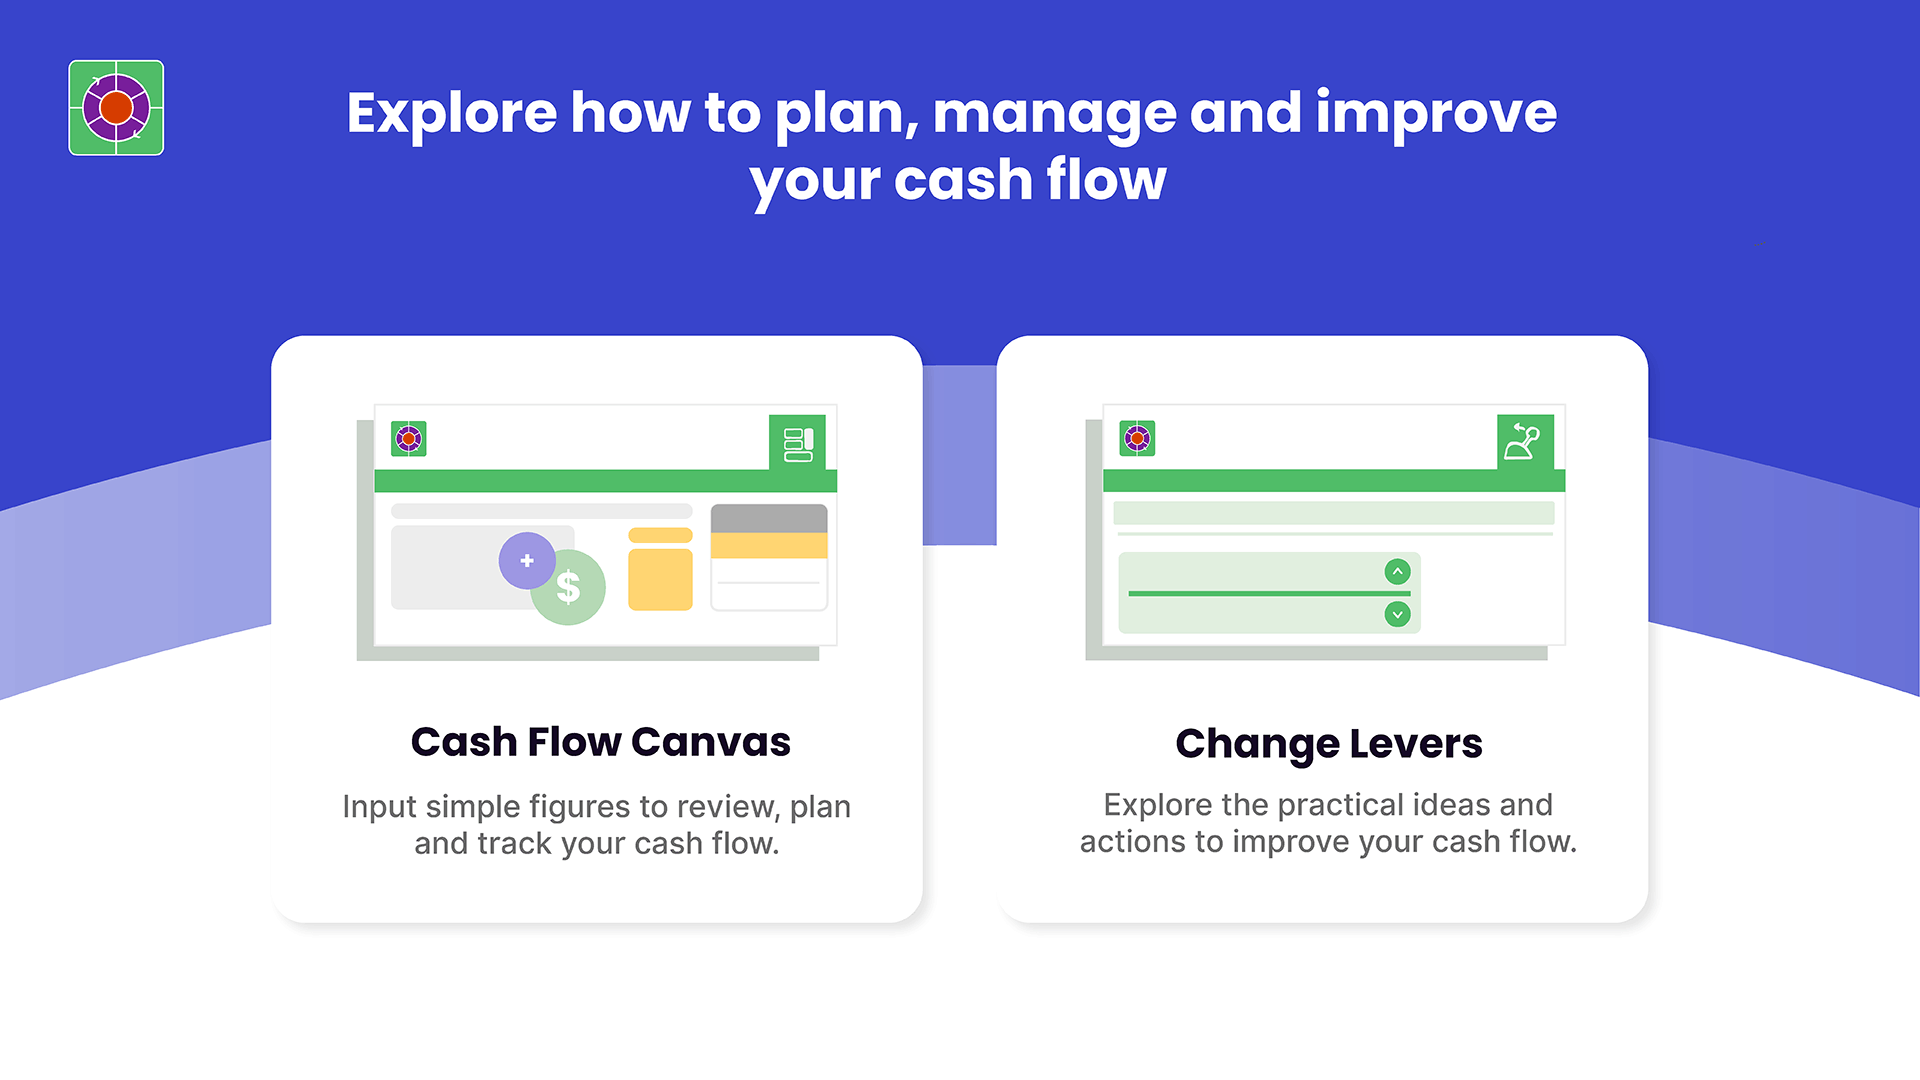 Explore how to plan manage and improve your cash flow